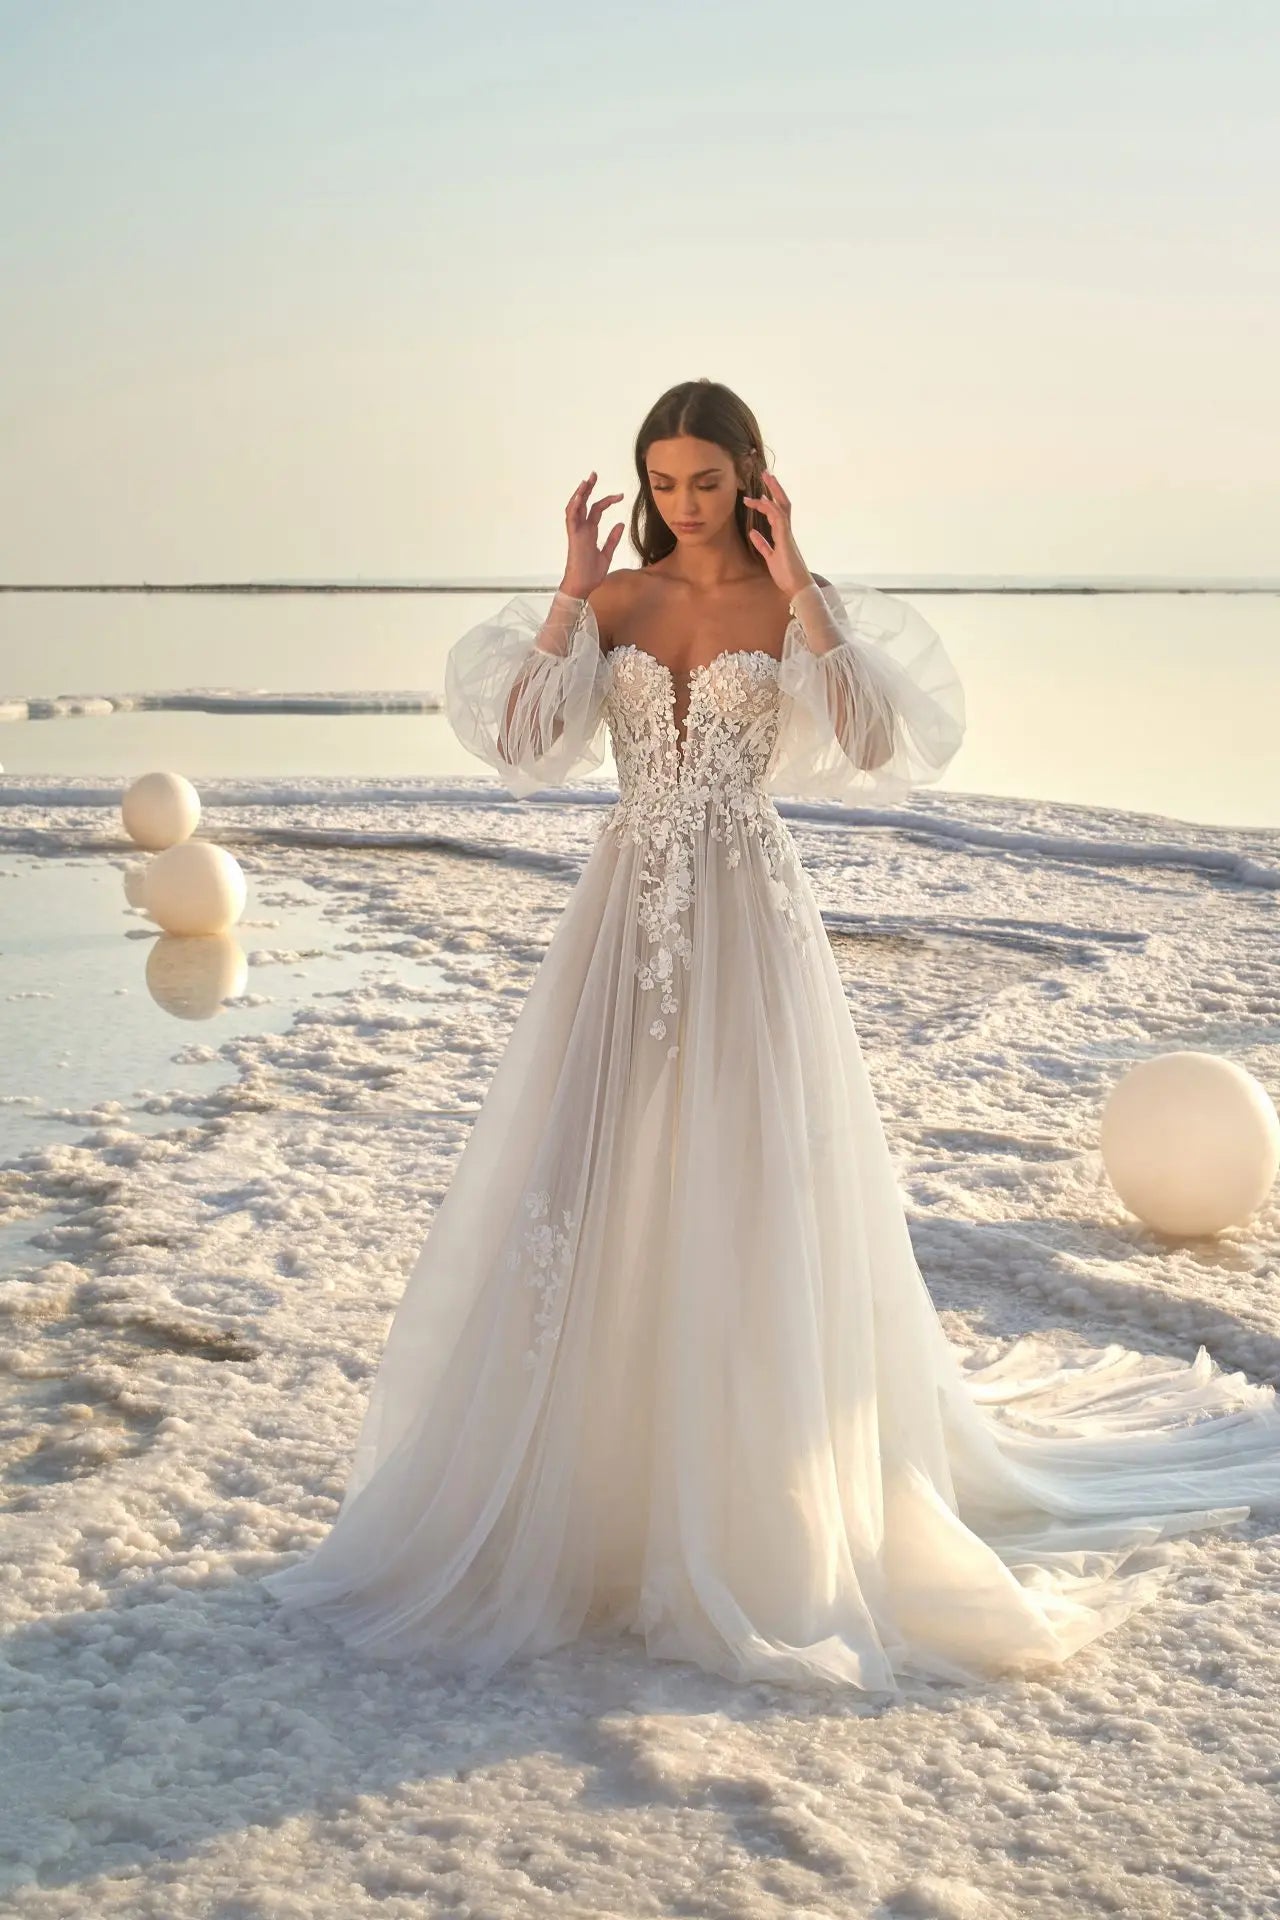 Beach A Line Off The Shoulder Wedding Dresses For Women Sweetheart Lantern Sleeves Pleats Tulle Bridal Gowns With Lace Appliques